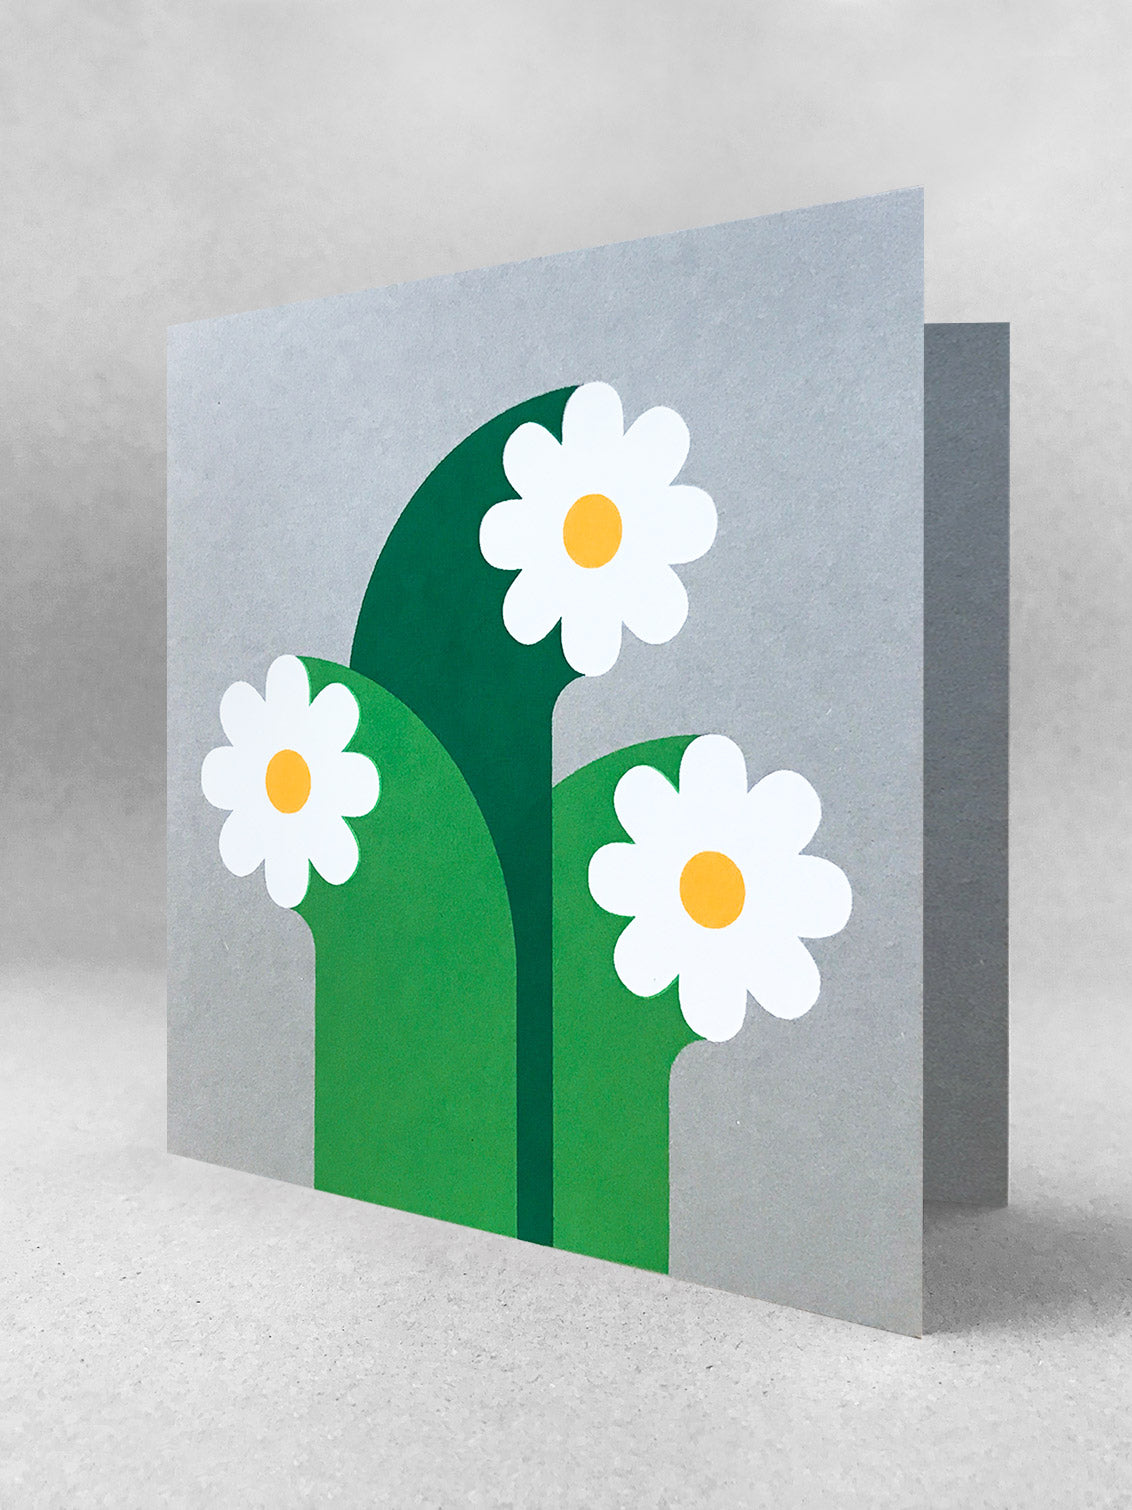 Three white flowers with graphic wide stalks and golden yellow circle centres, screenprinted onto grey card, stood slightly open in a light grey studio shot.